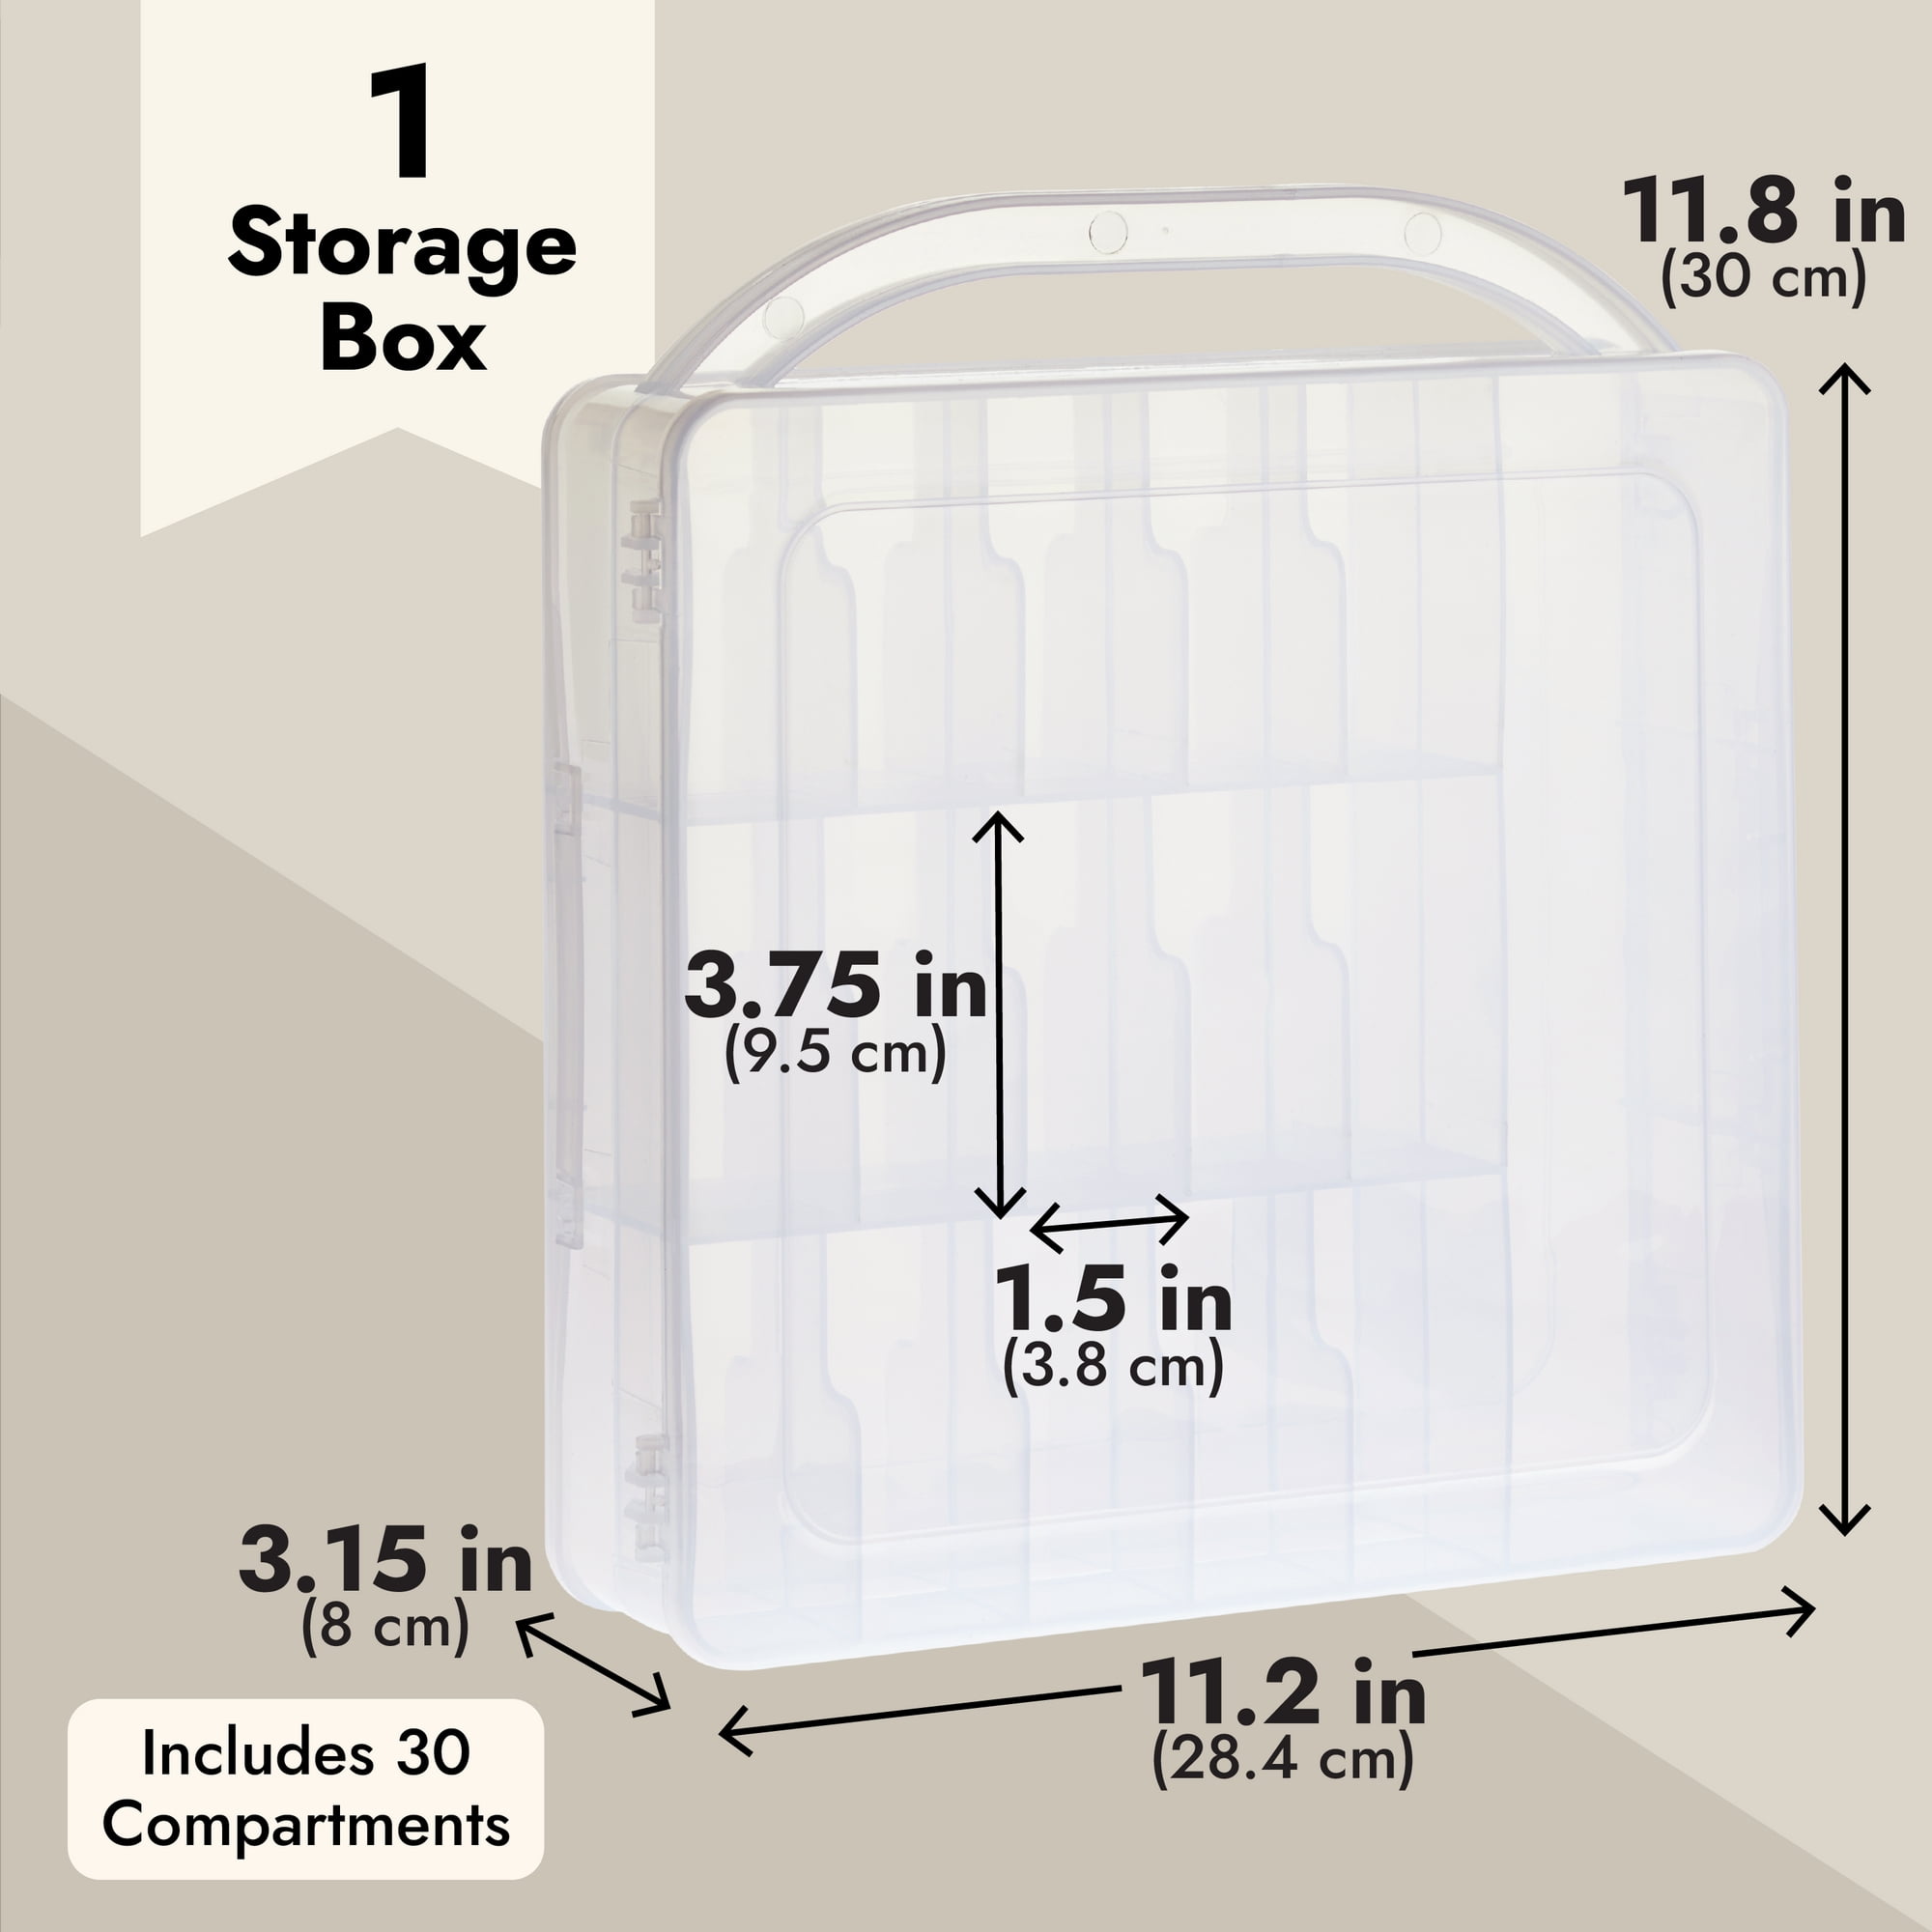 Nail polish storage • Compare & find best price now »